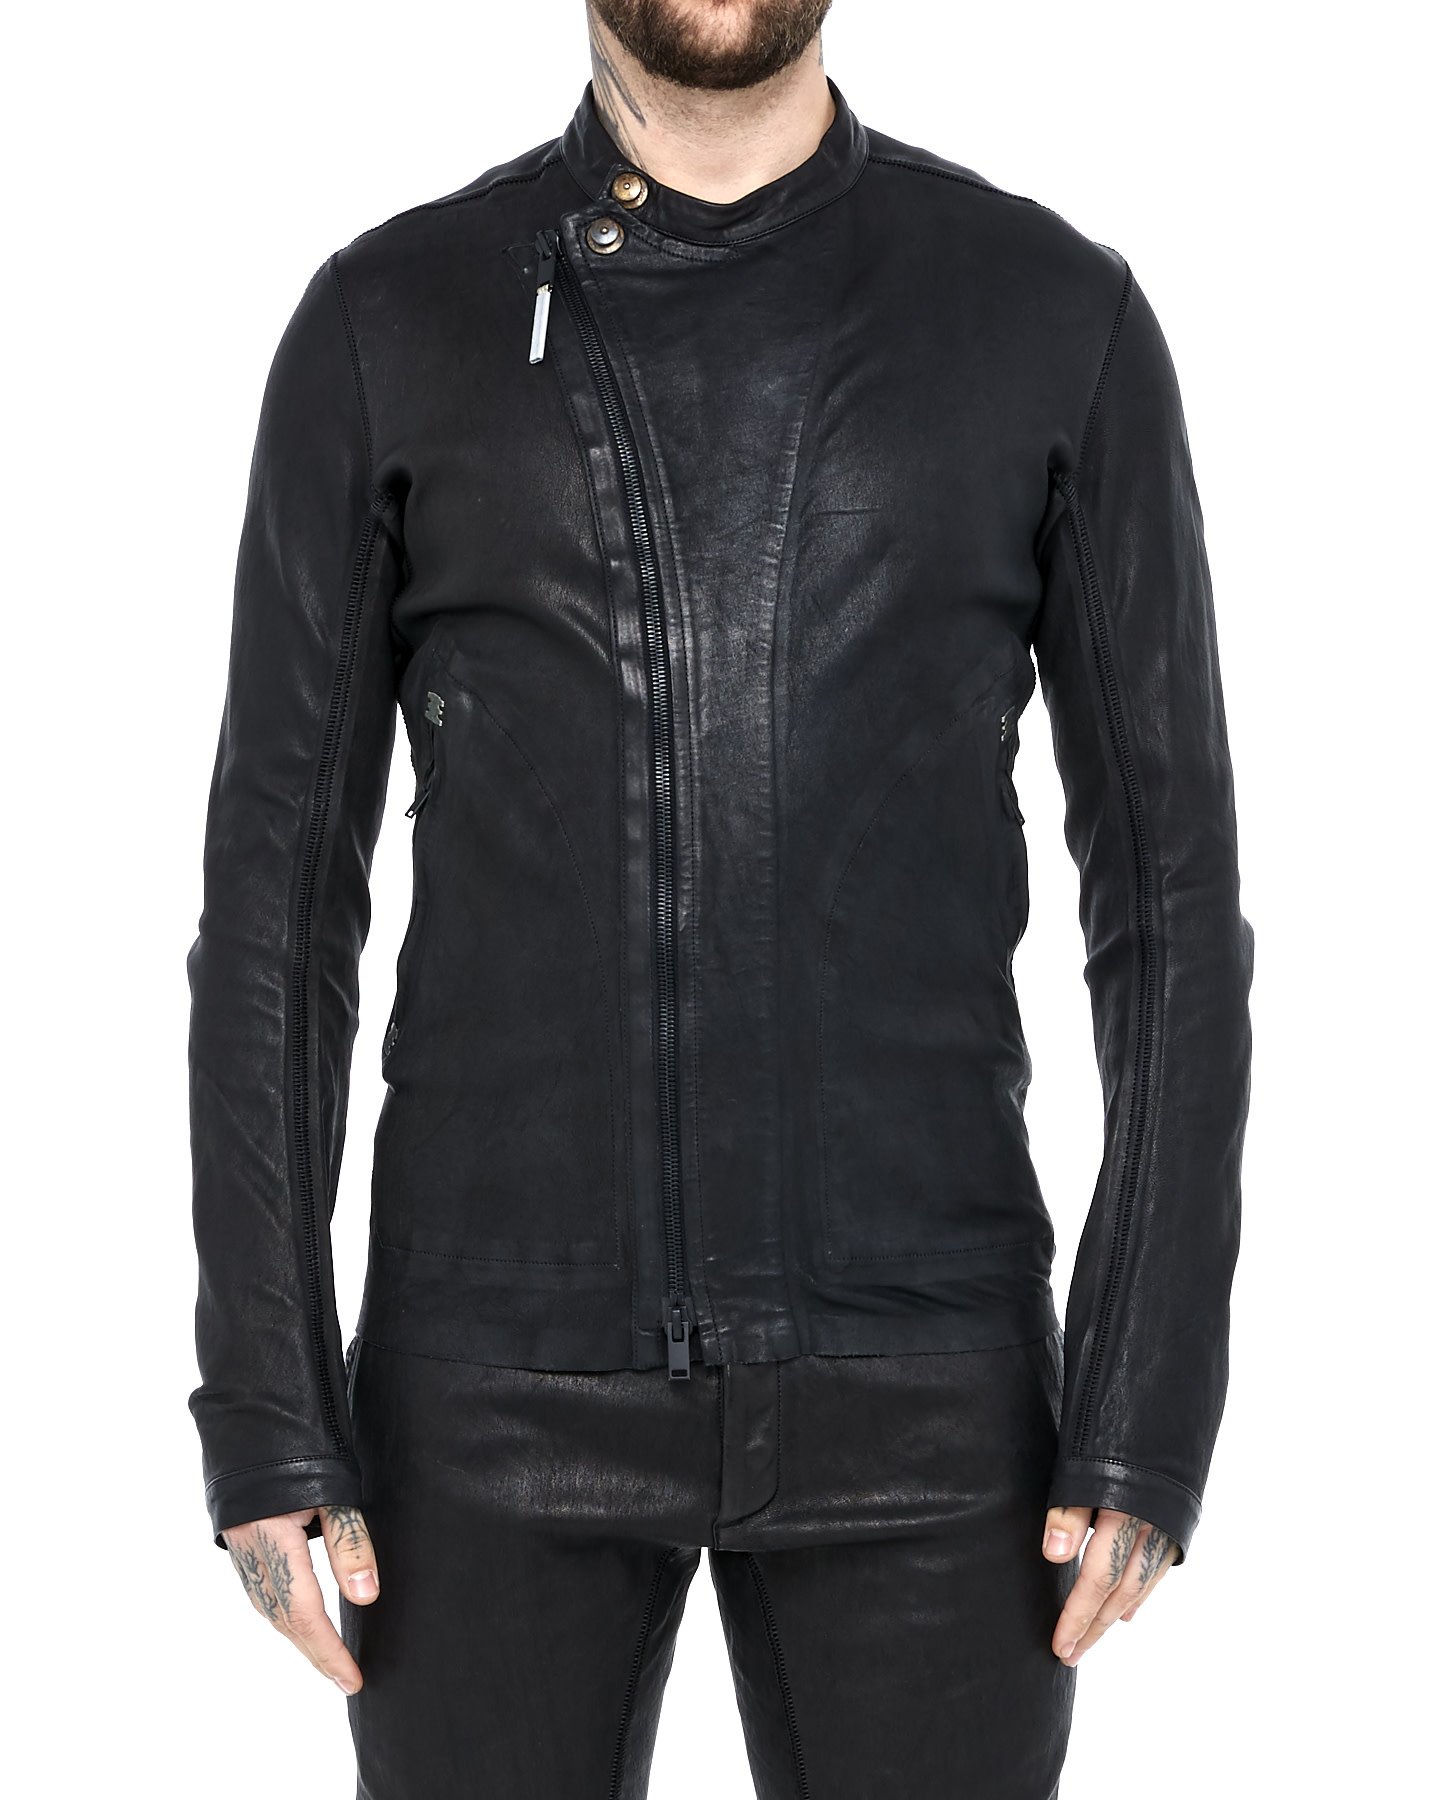 Bute Neo Stretch Leather Jacket Shop Sellam Isaac by Untitled | Shop - NYC NYC Untitled